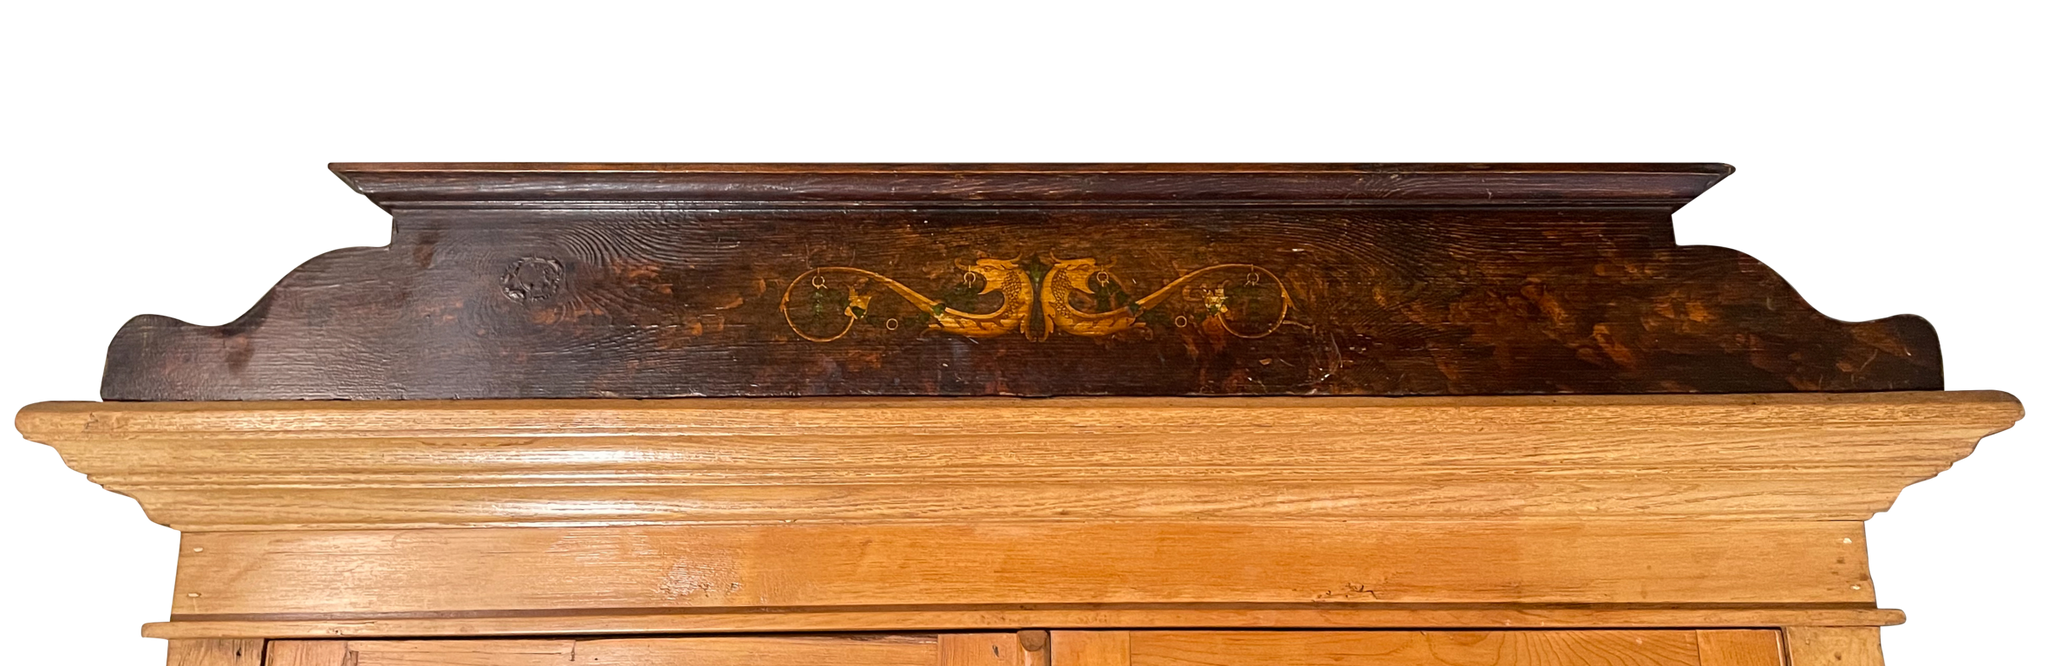 Pine Upper Glazed Crested Dresser with Hand Painted Decoration